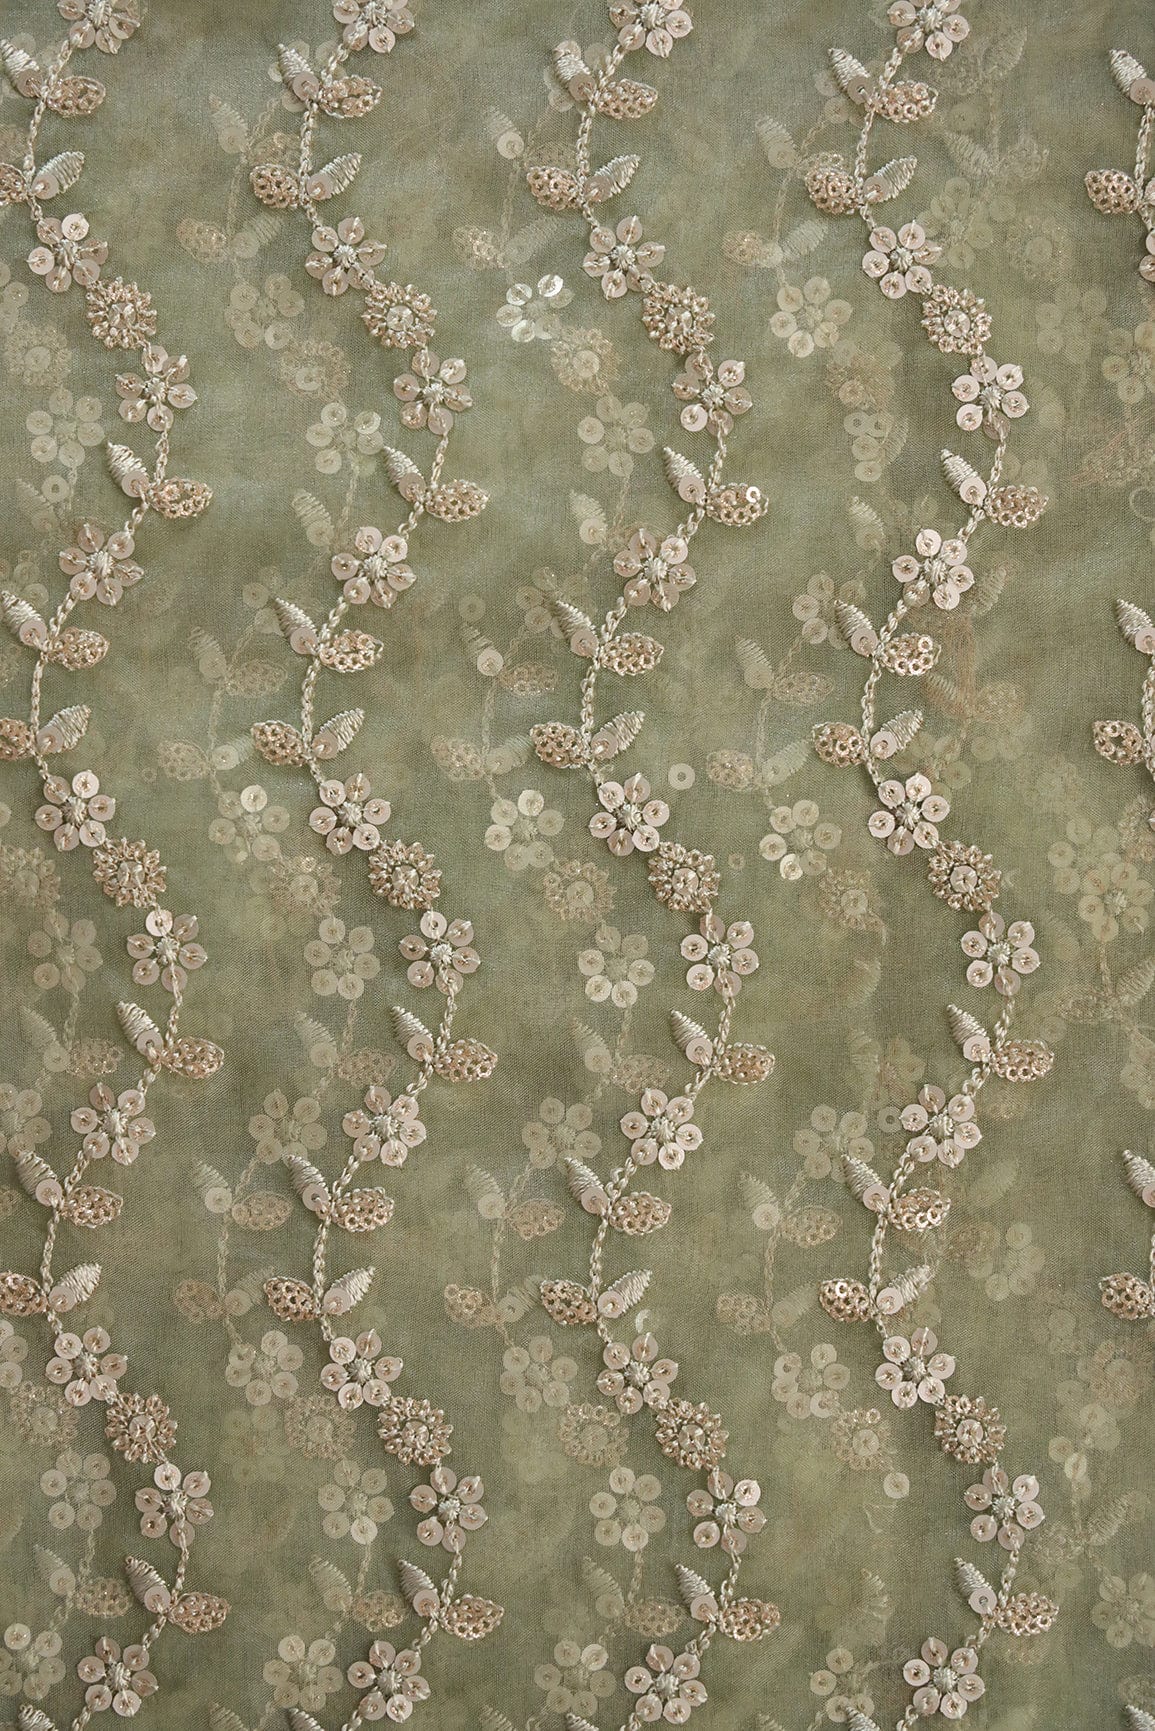 doeraa Embroidery Fabrics 3.25 Meter Cut Piece Of Sequins With Olive Thread Embroidery Work On Olive Organza Fabric